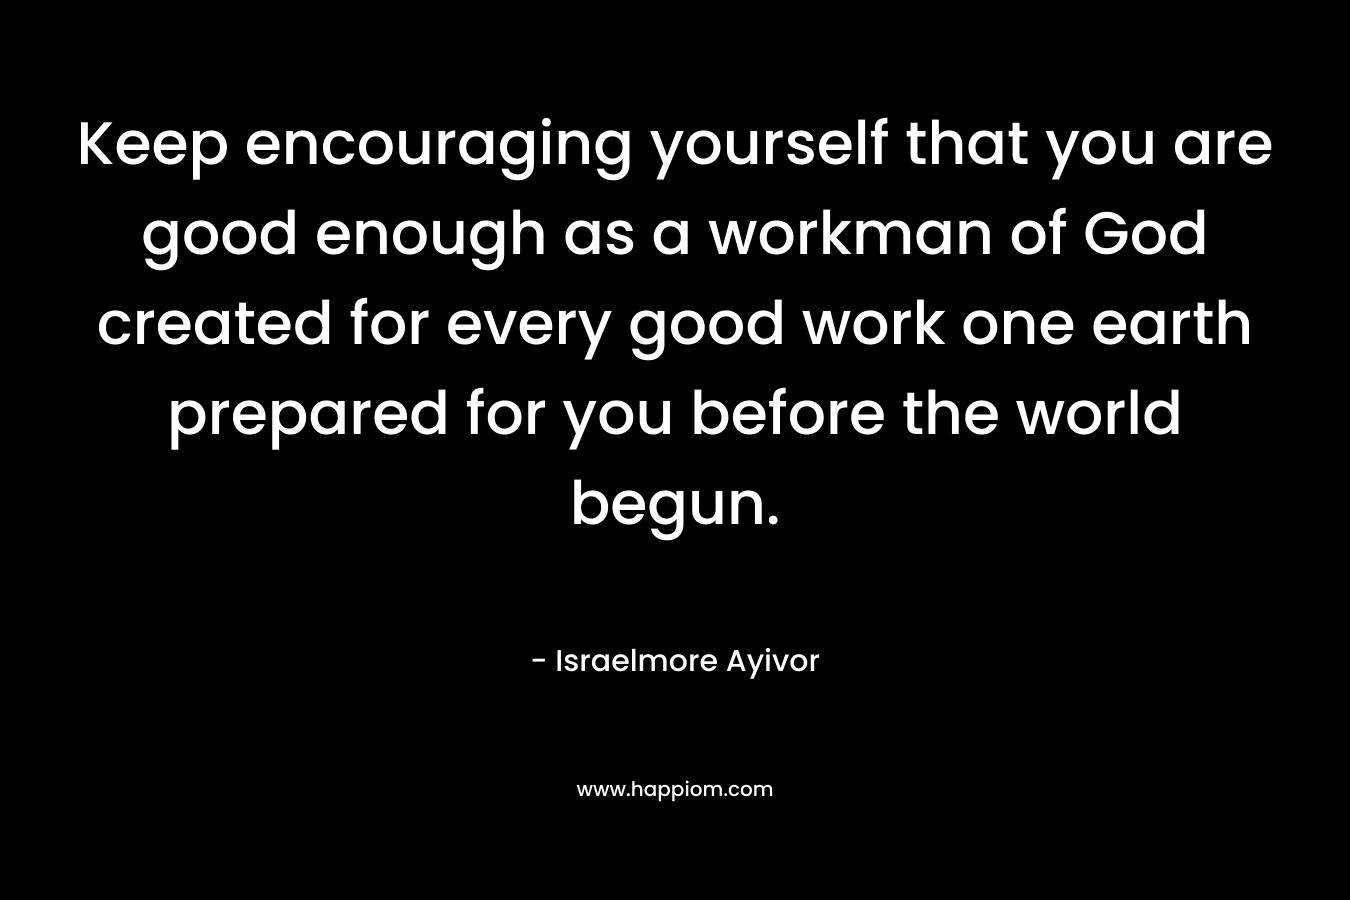 Keep encouraging yourself that you are good enough as a workman of God created for every good work one earth prepared for you before the world begun. – Israelmore Ayivor